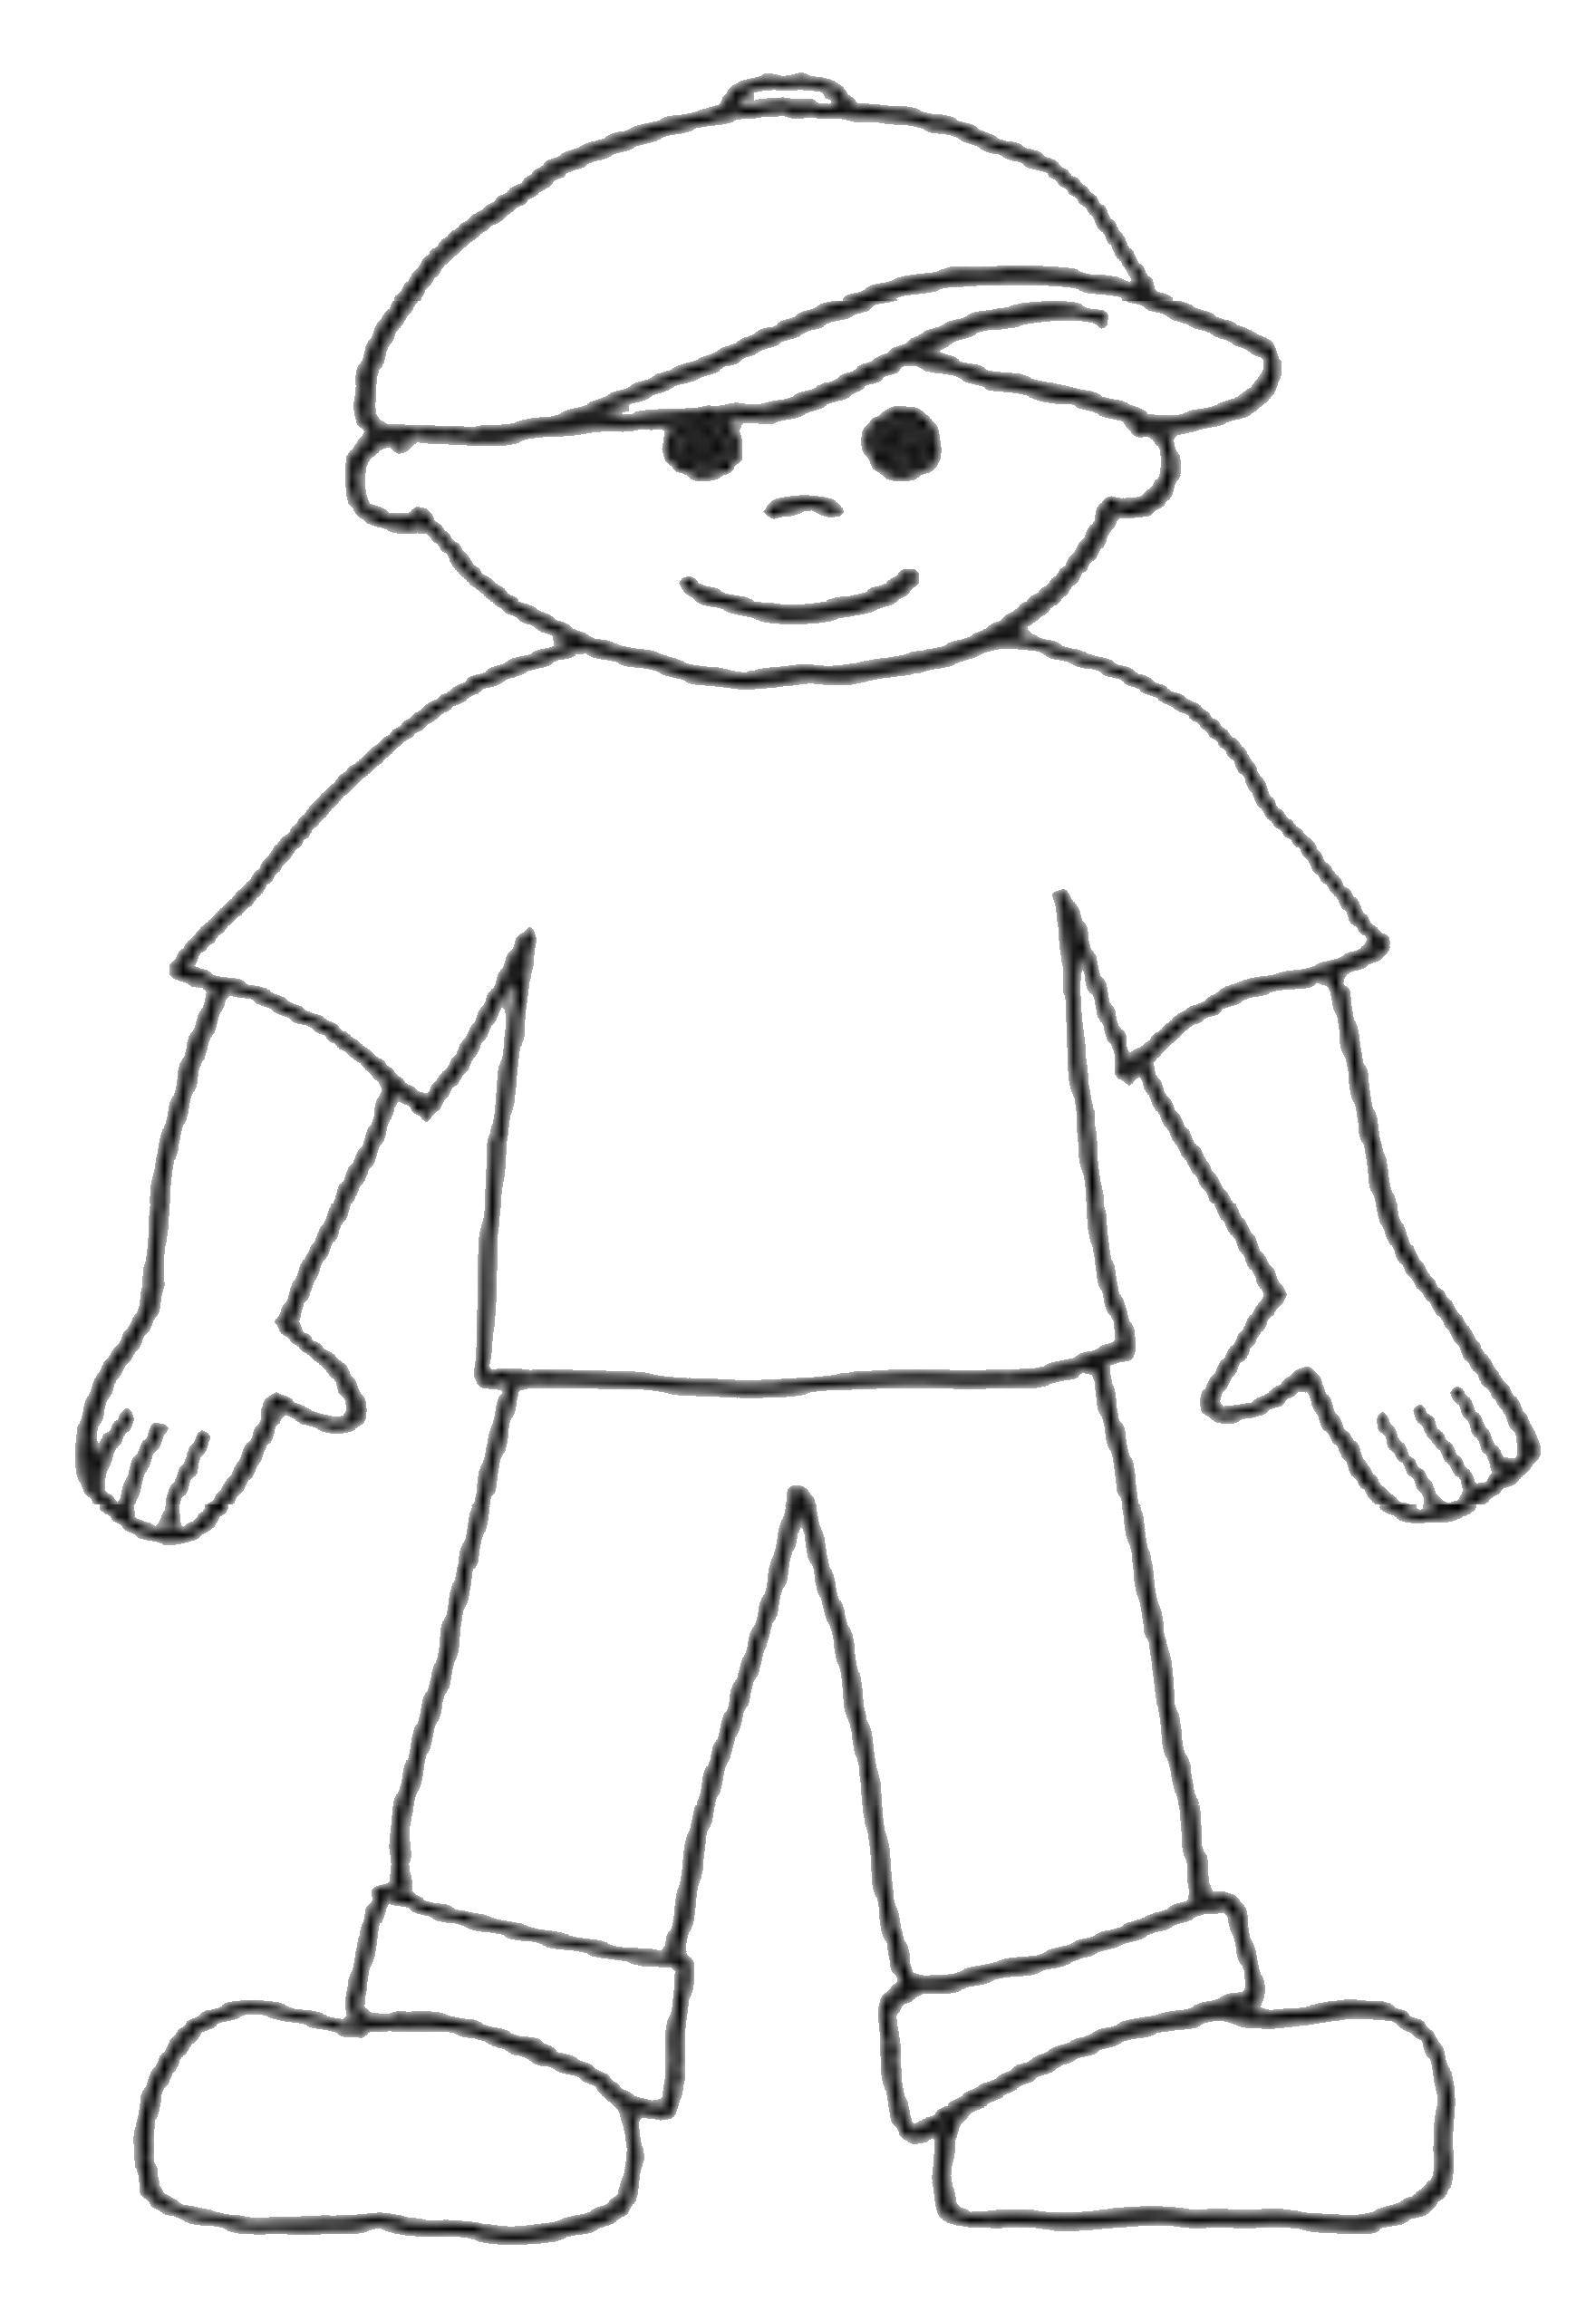 Coloring The boy in the cap. Category the contour of the boy. Tags:  boy, cap, t-shirt.